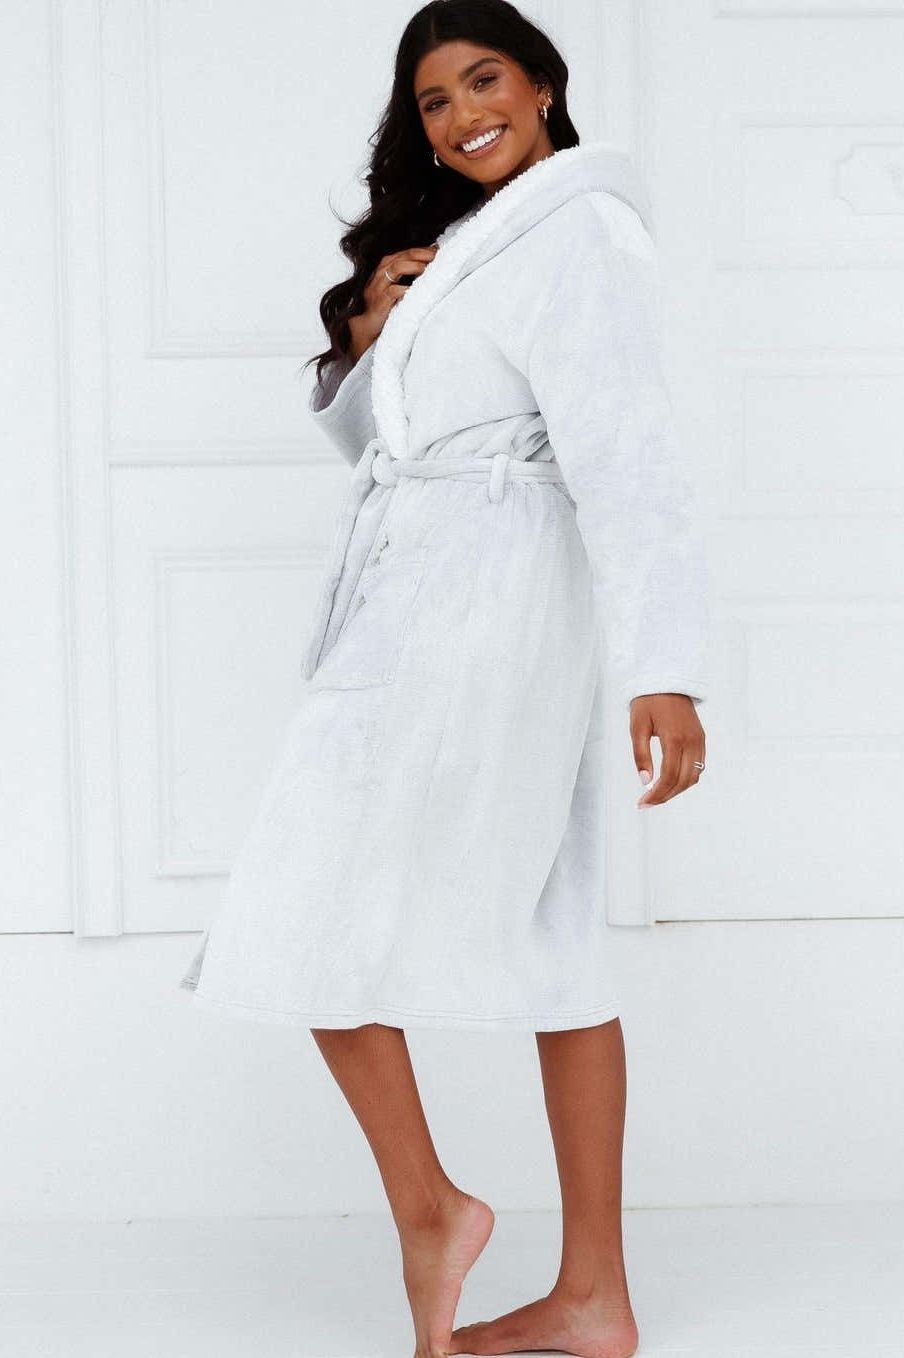 Skims Robes, robe dresses and bathrobes for Women, Online Sale up to 50%  off